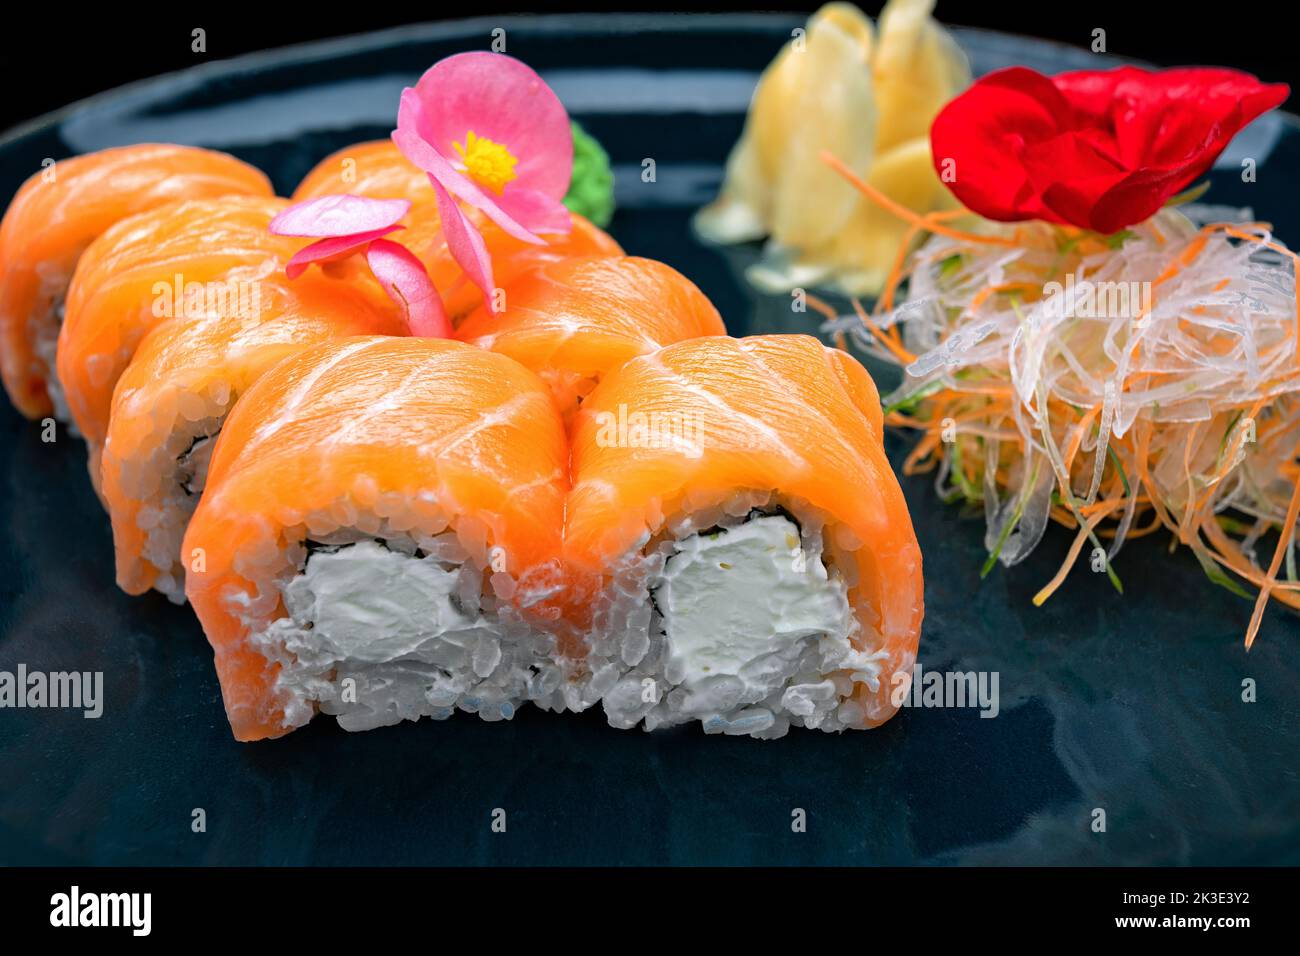 Sushi rolls with cheese and salmon, on a dark background Stock Photo